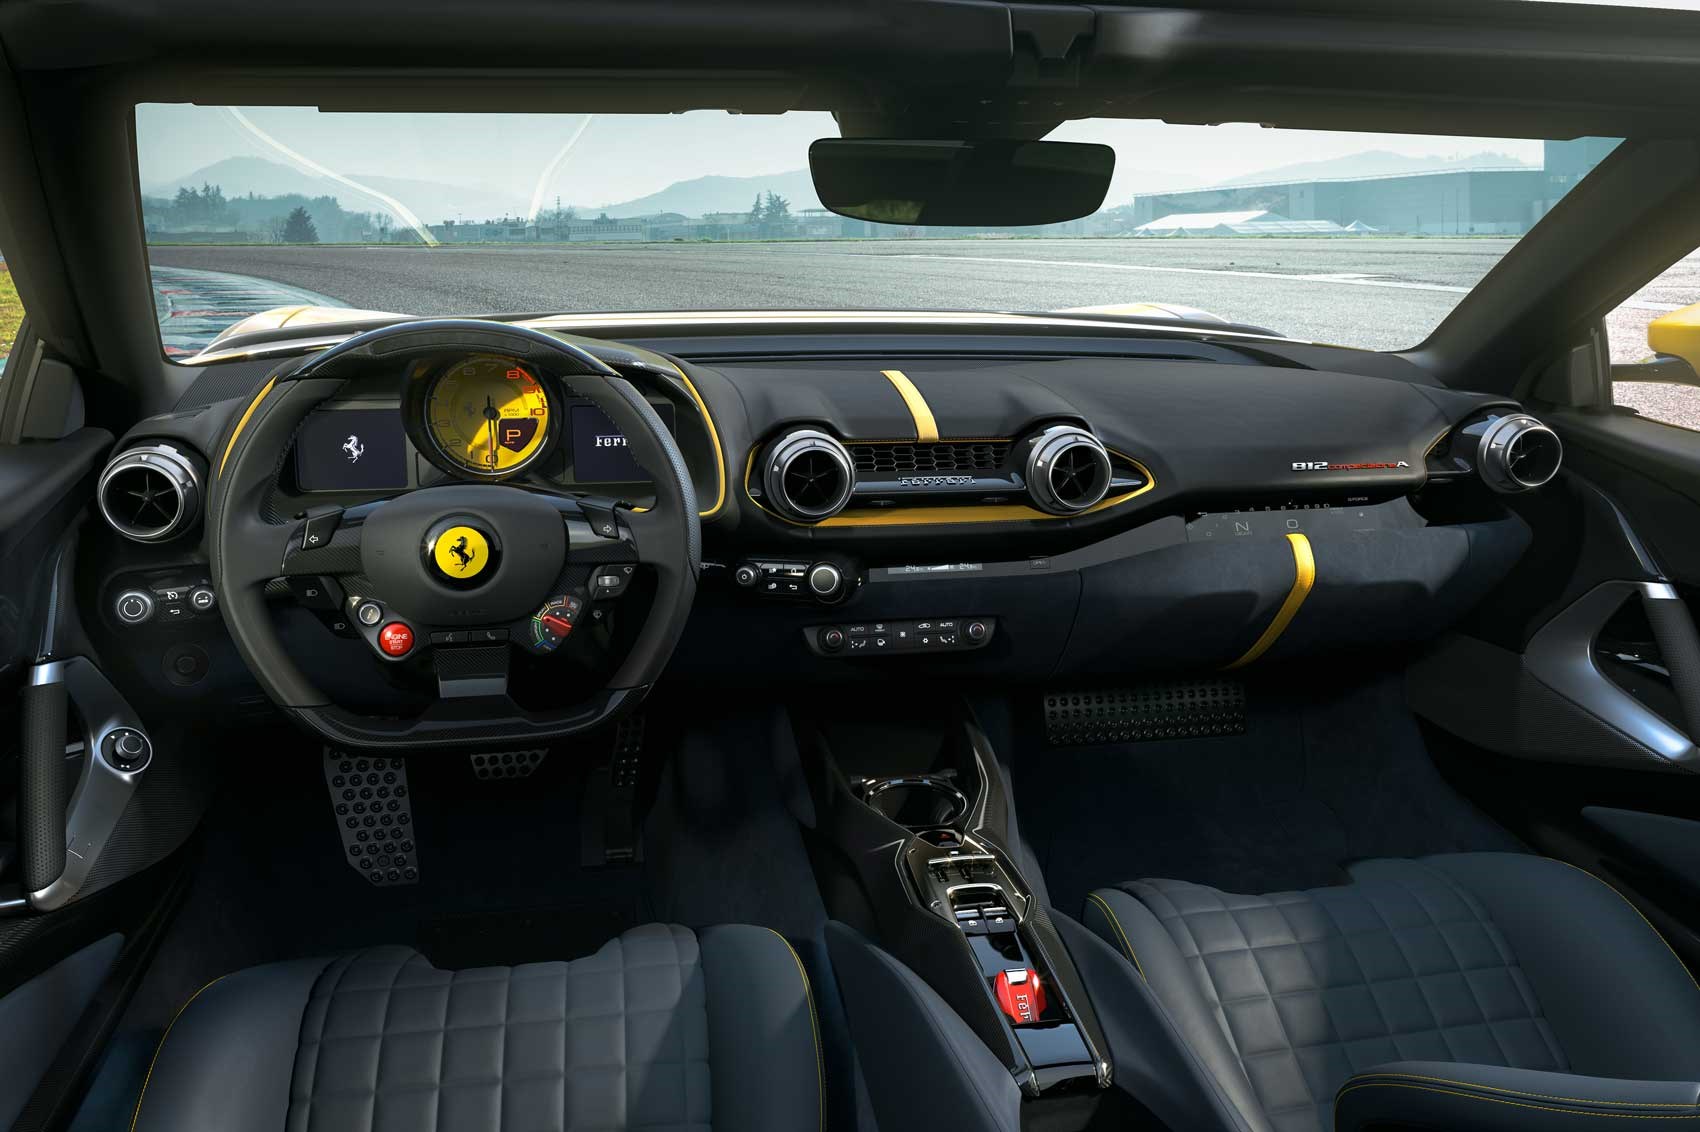 New Ferrari 812 Competizione revealed: there's life in the V12 yet